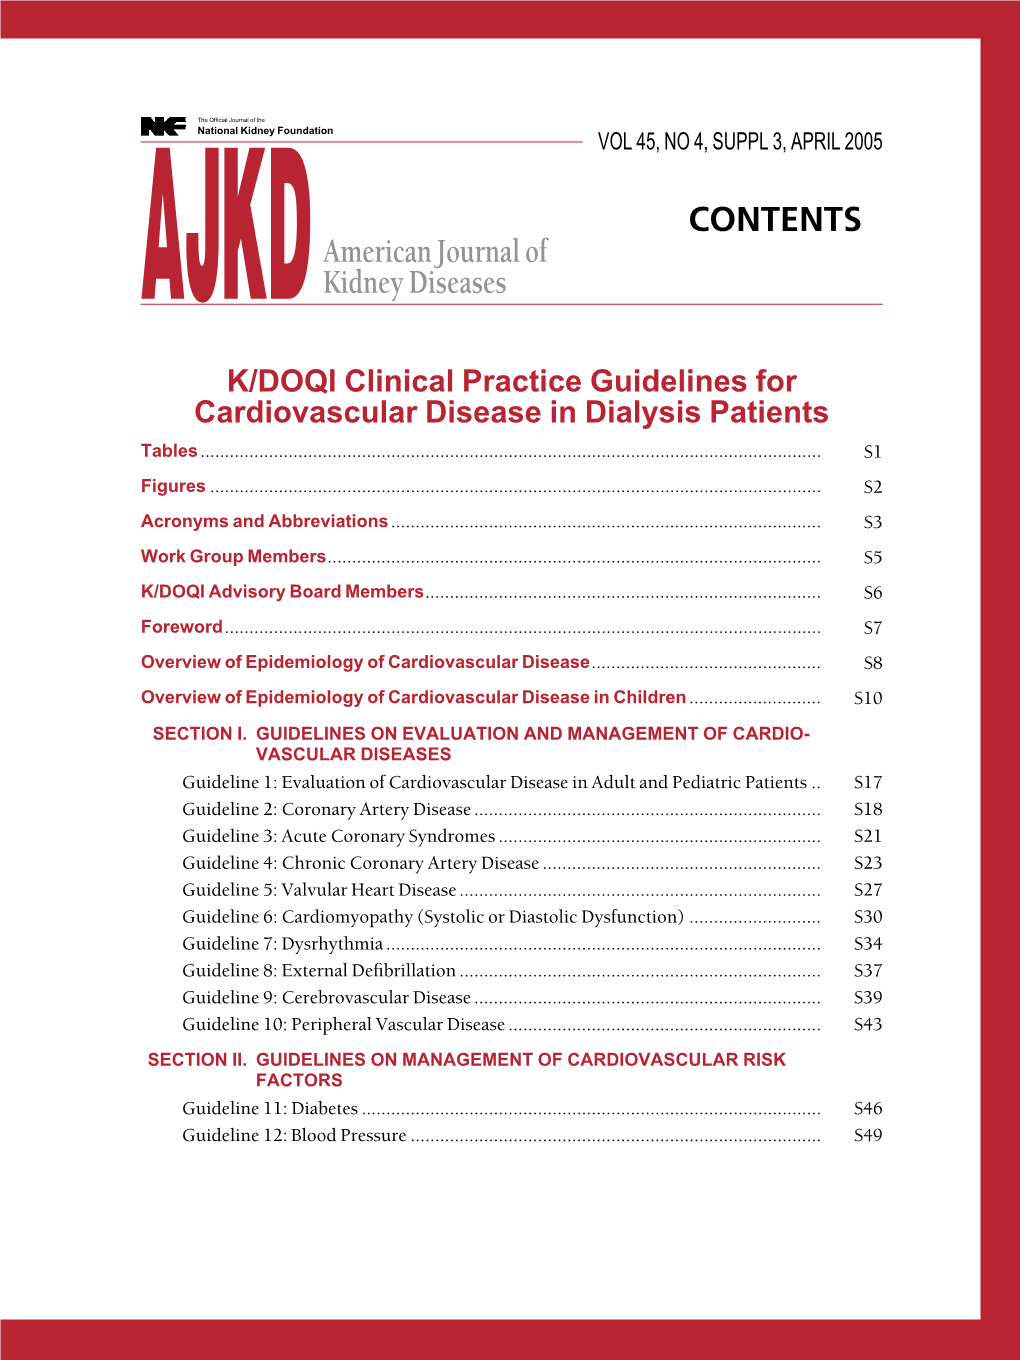 K/DOQI Clinical Practice Guidelines for Cardiovascular Disease in Dialysis Patients Tables